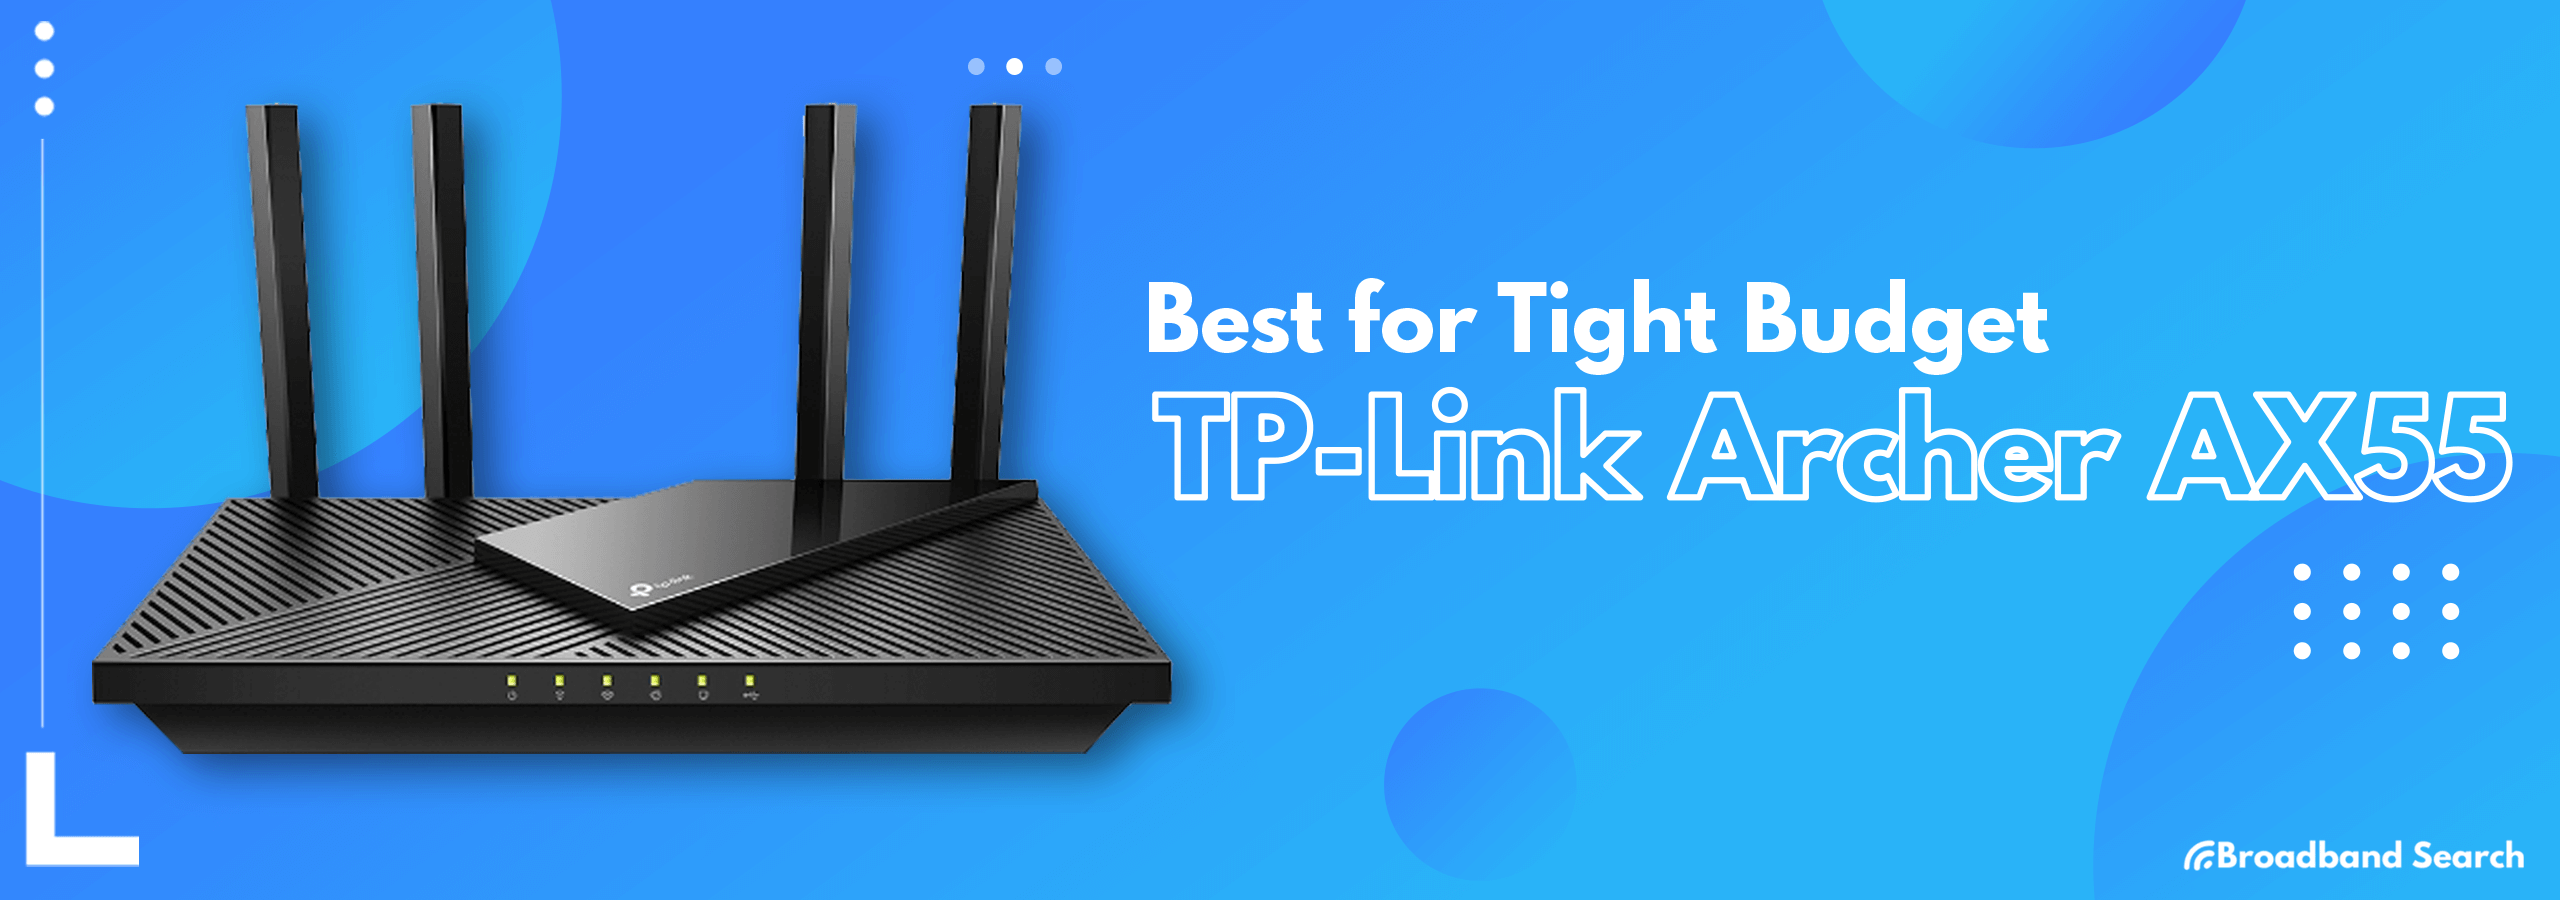 Best wifi router for those on a tight budget